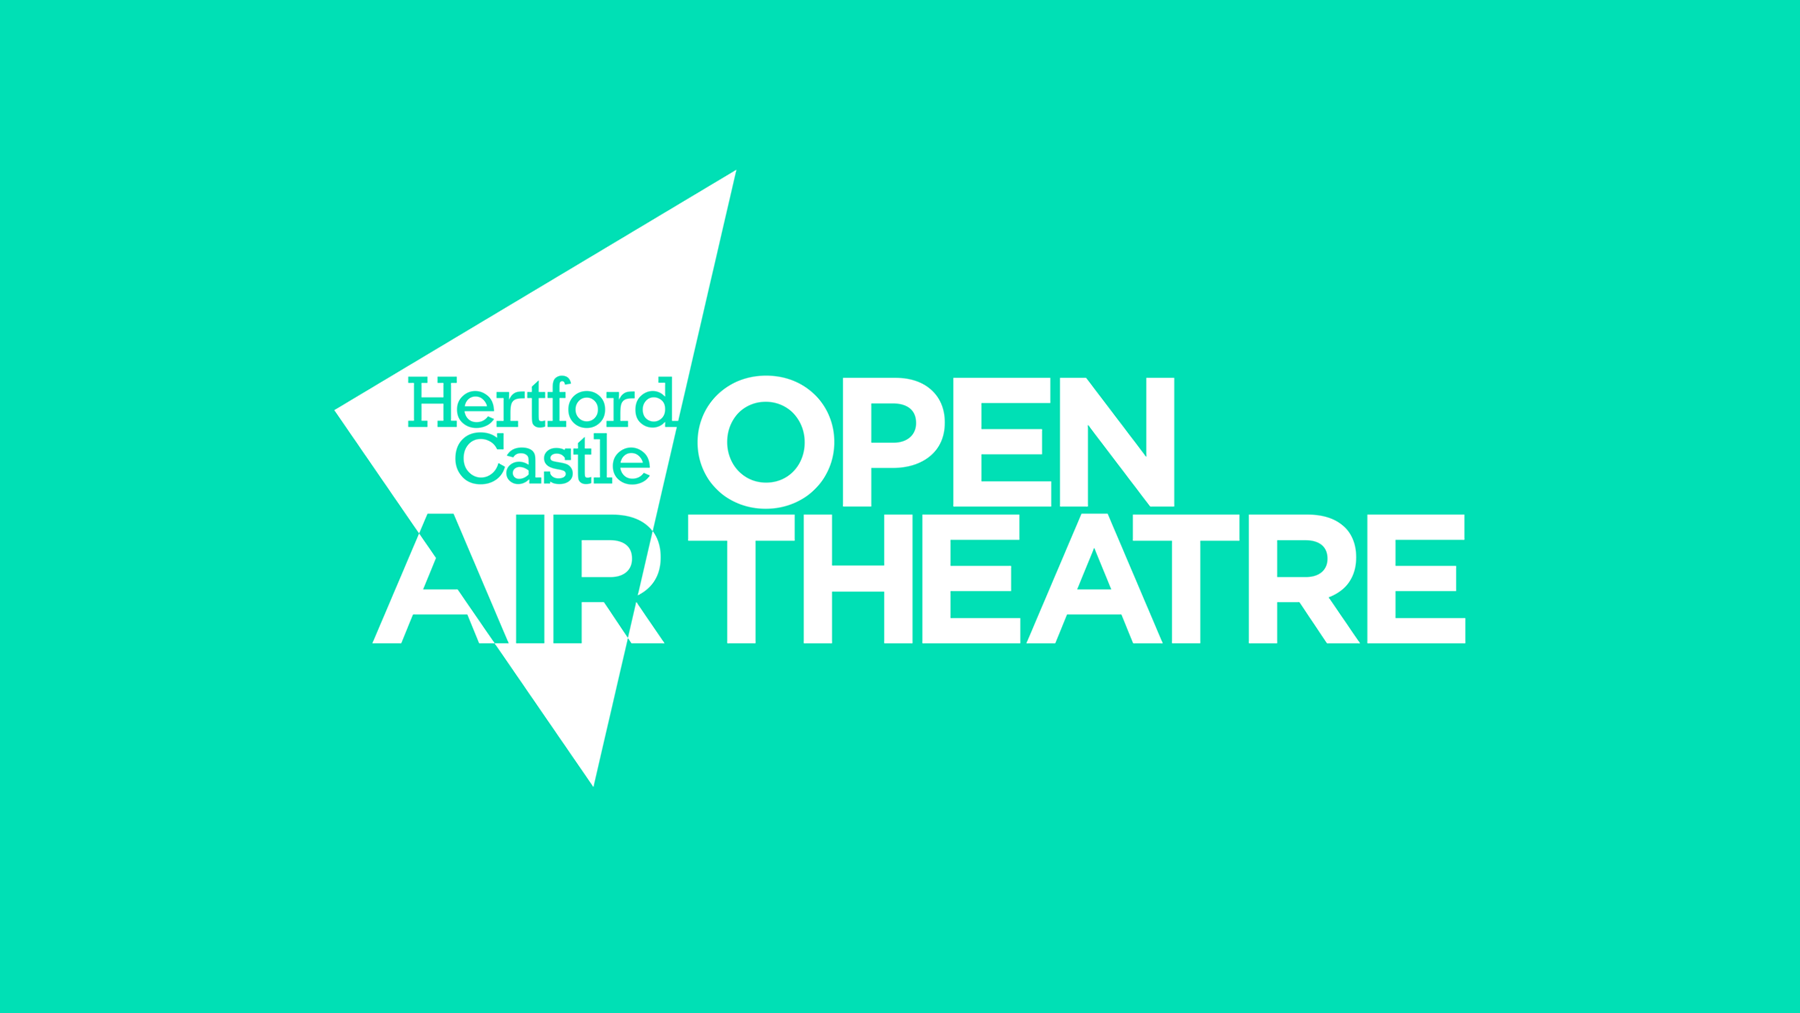 Hertford Castle's open-air theatre brand design over a solid teal background.